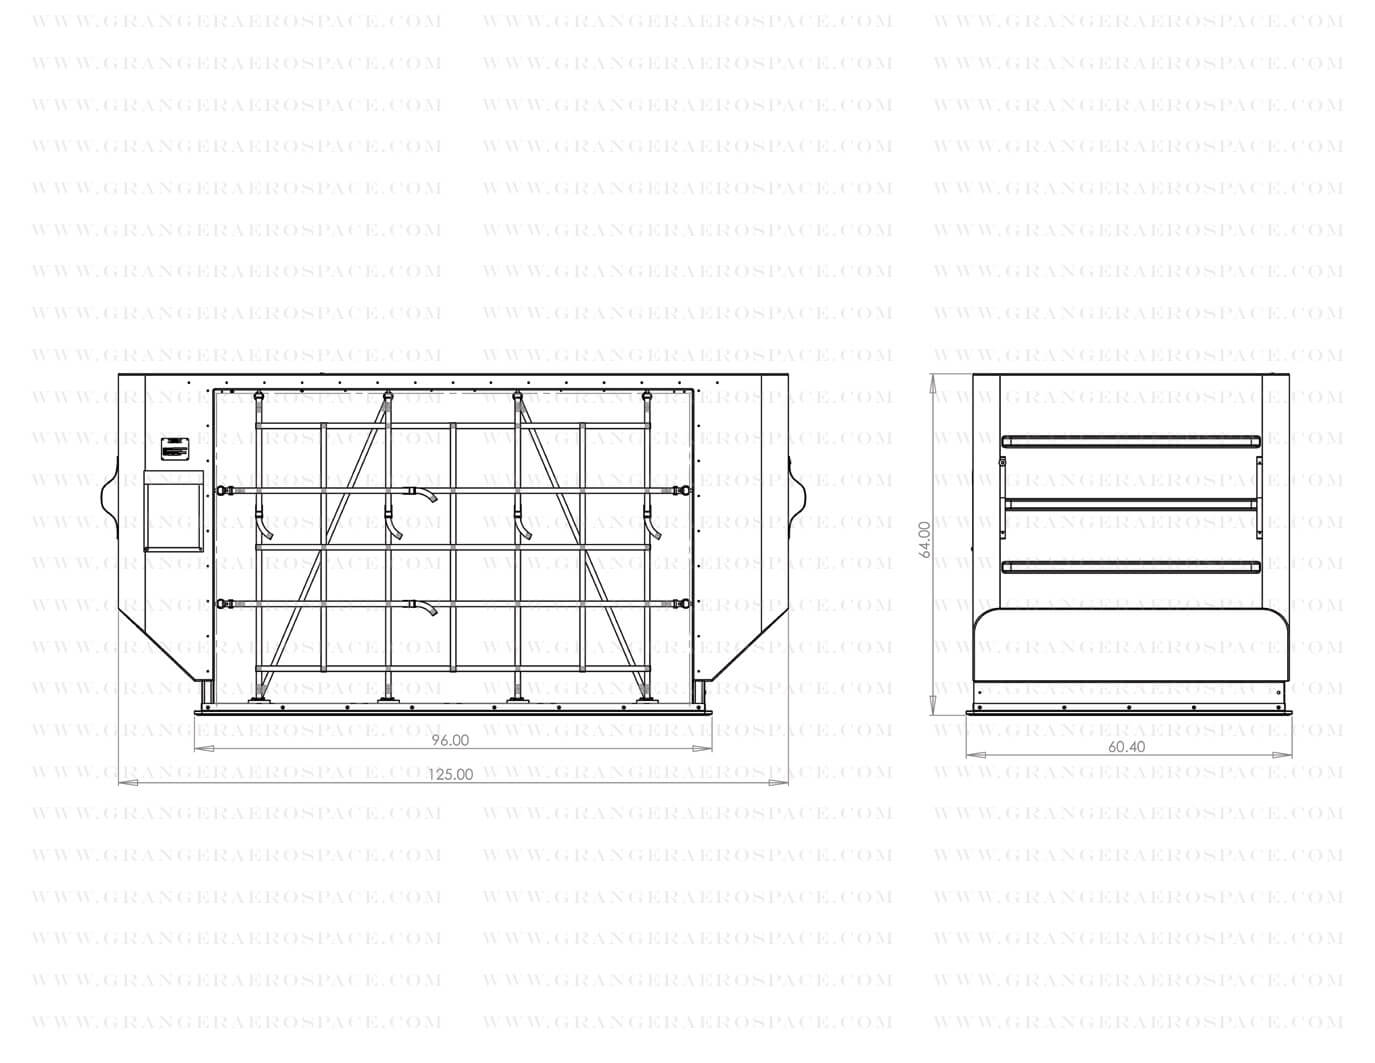 LD 8 Dimensions, LD 8 Air Cargo Container Dimensions, DQF dimensions, DQF ULD Container Dimensions